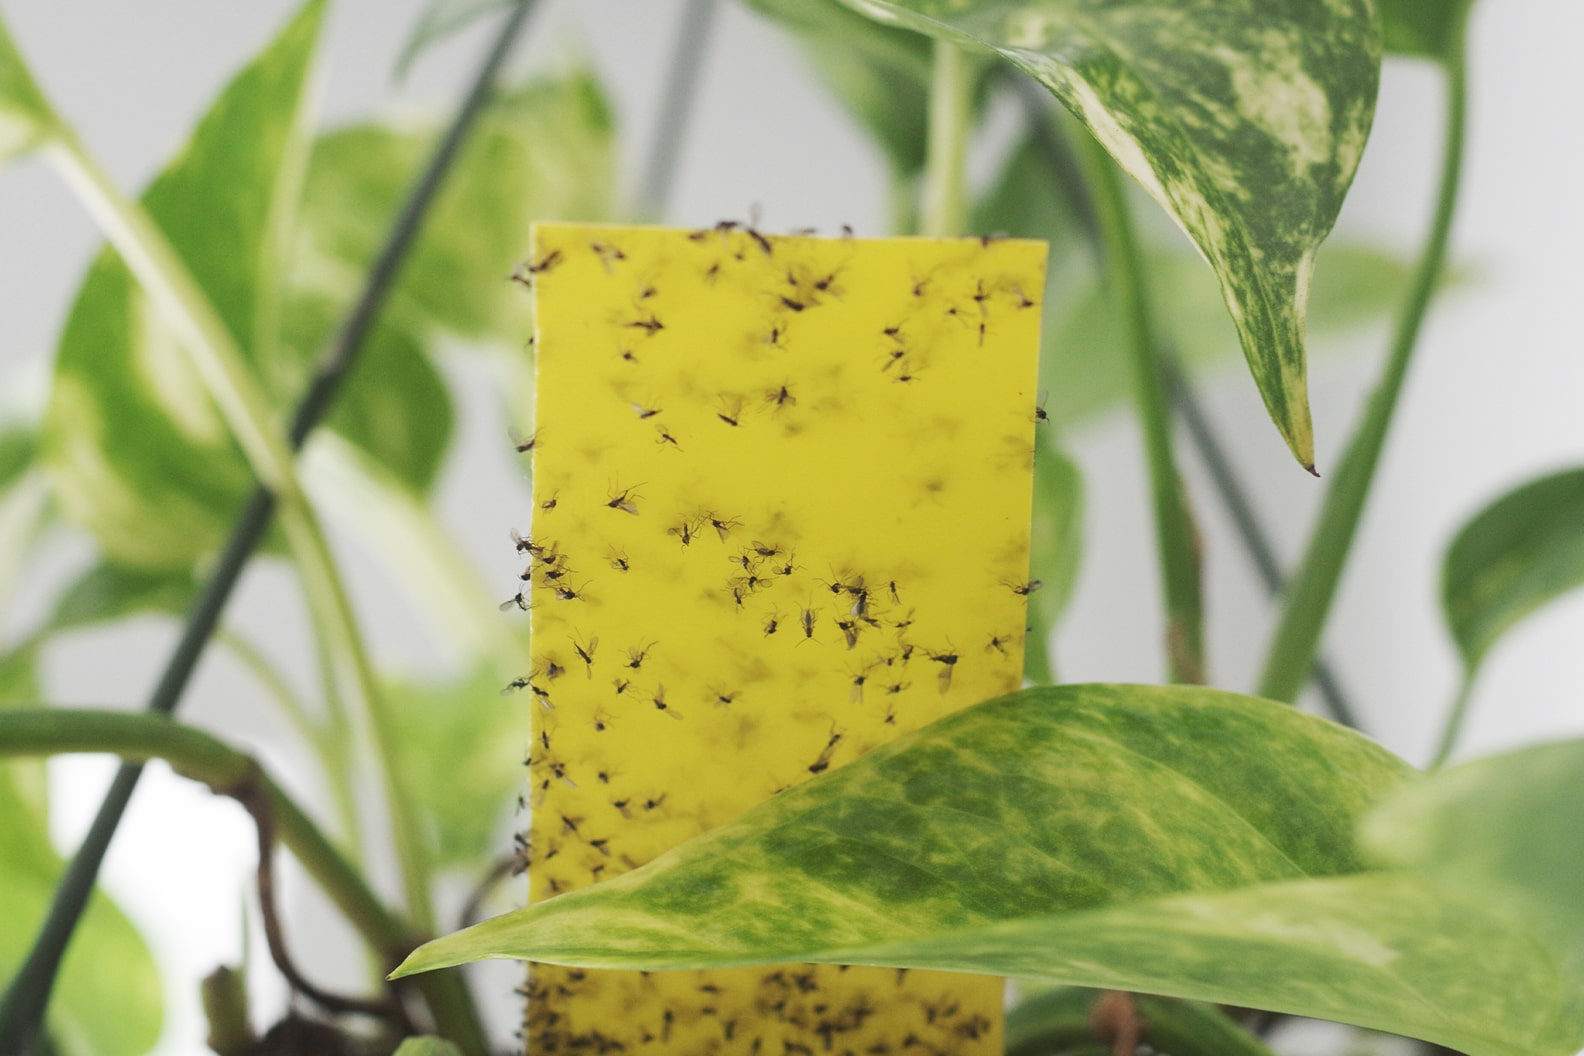 How To Deal With Fungus Gnats On Houseplants (What Works)